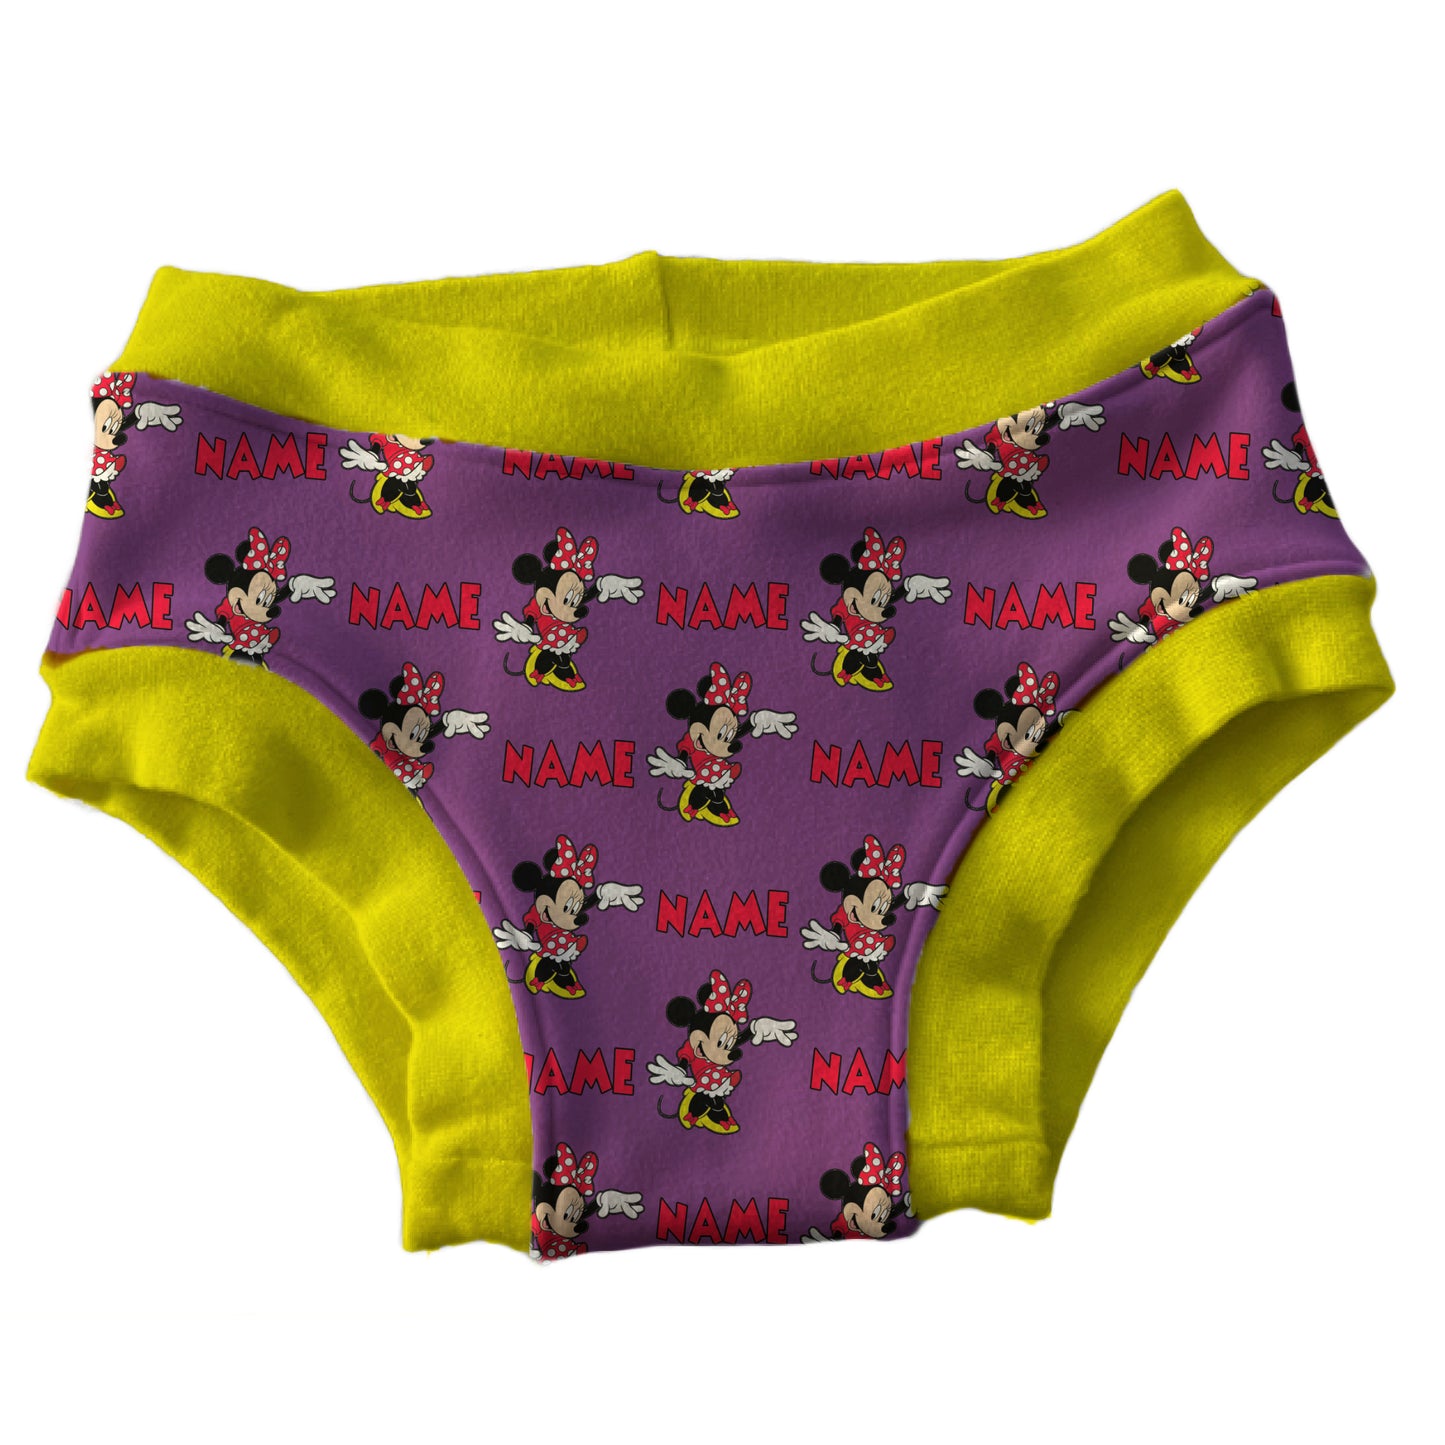 Minnie Mouse Cloth Pull-Ups